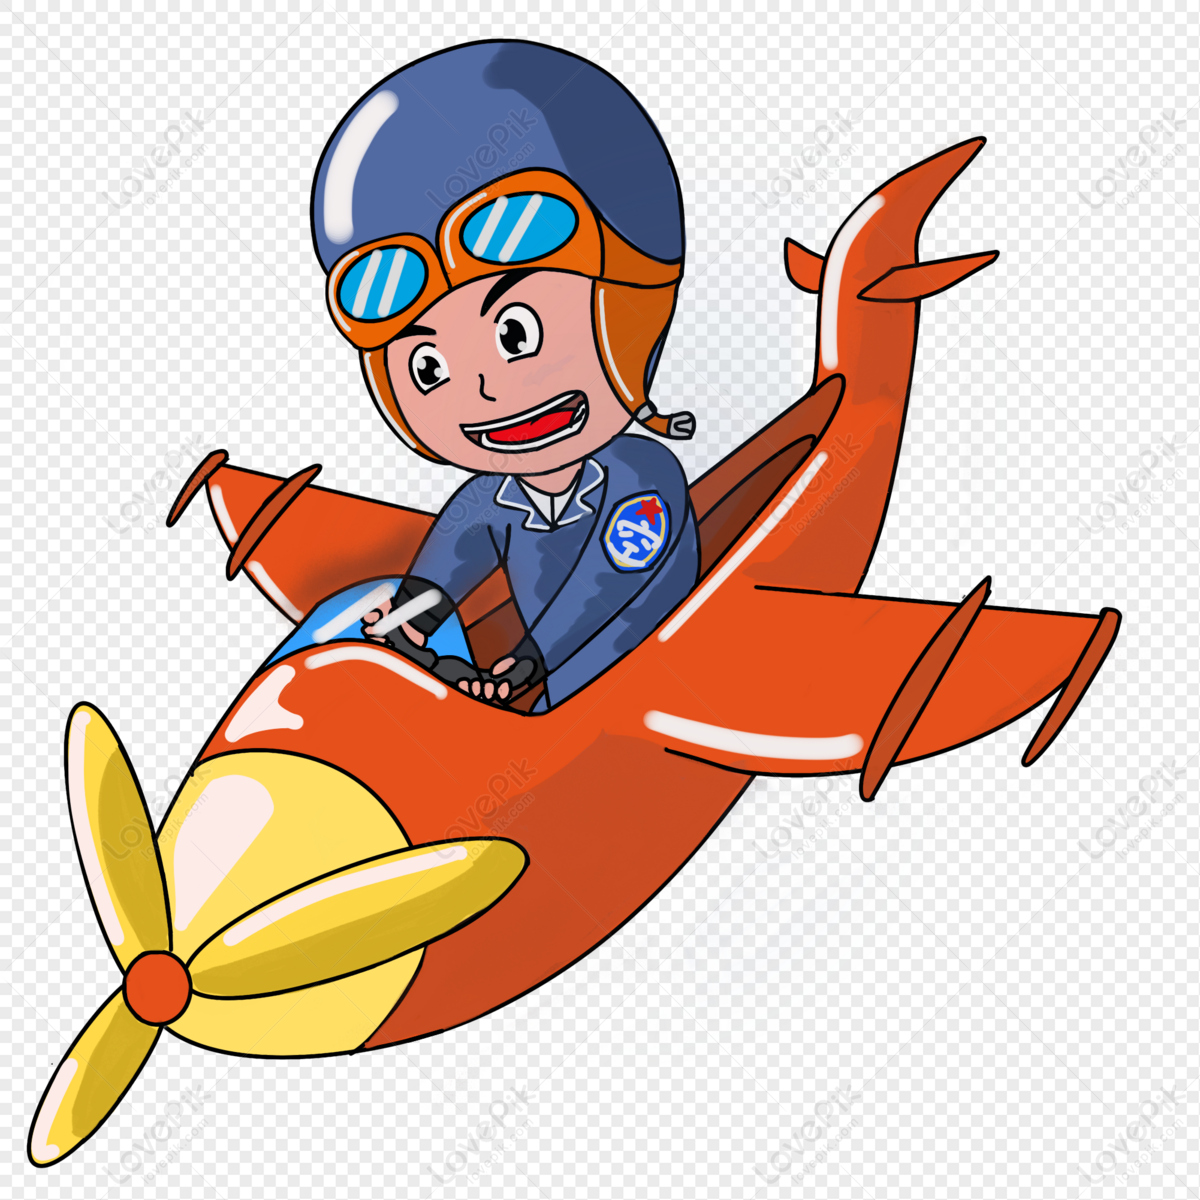 Pilot PNG Image Free Download And Clipart Image For Free Download - Lovepik  | 401435911